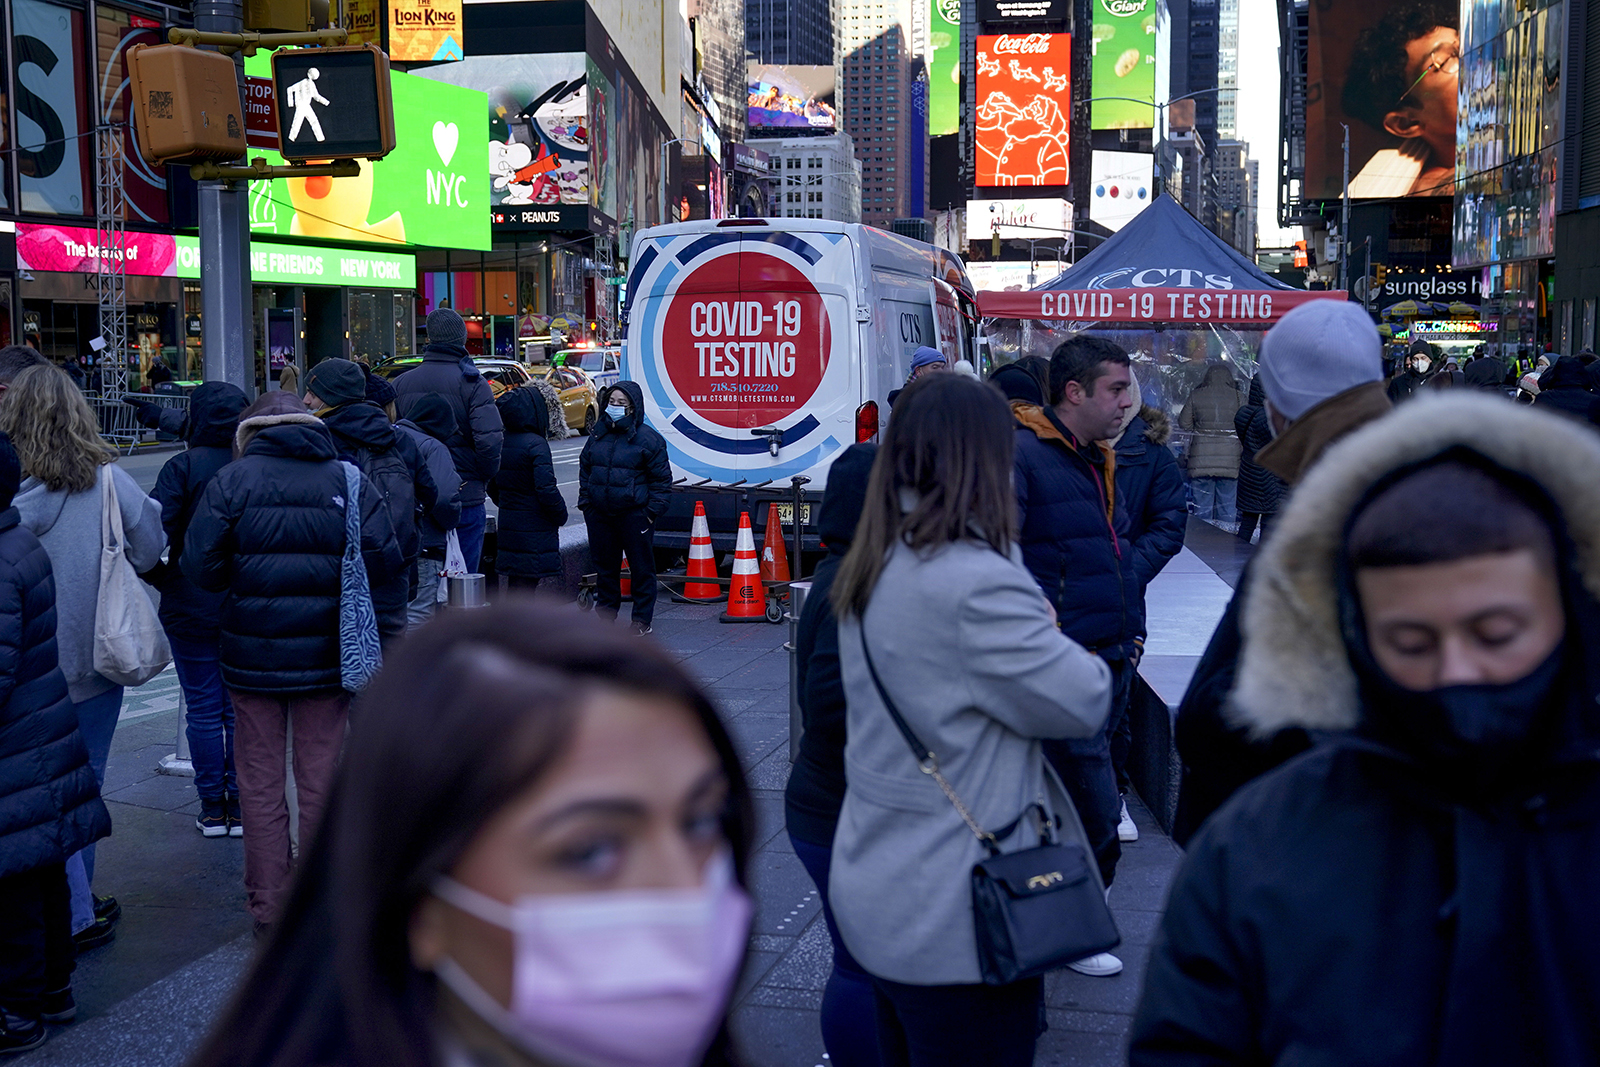 People wait in line to get tested for COVID-19 in Times Square, New York, on Dec. 20, 2021.